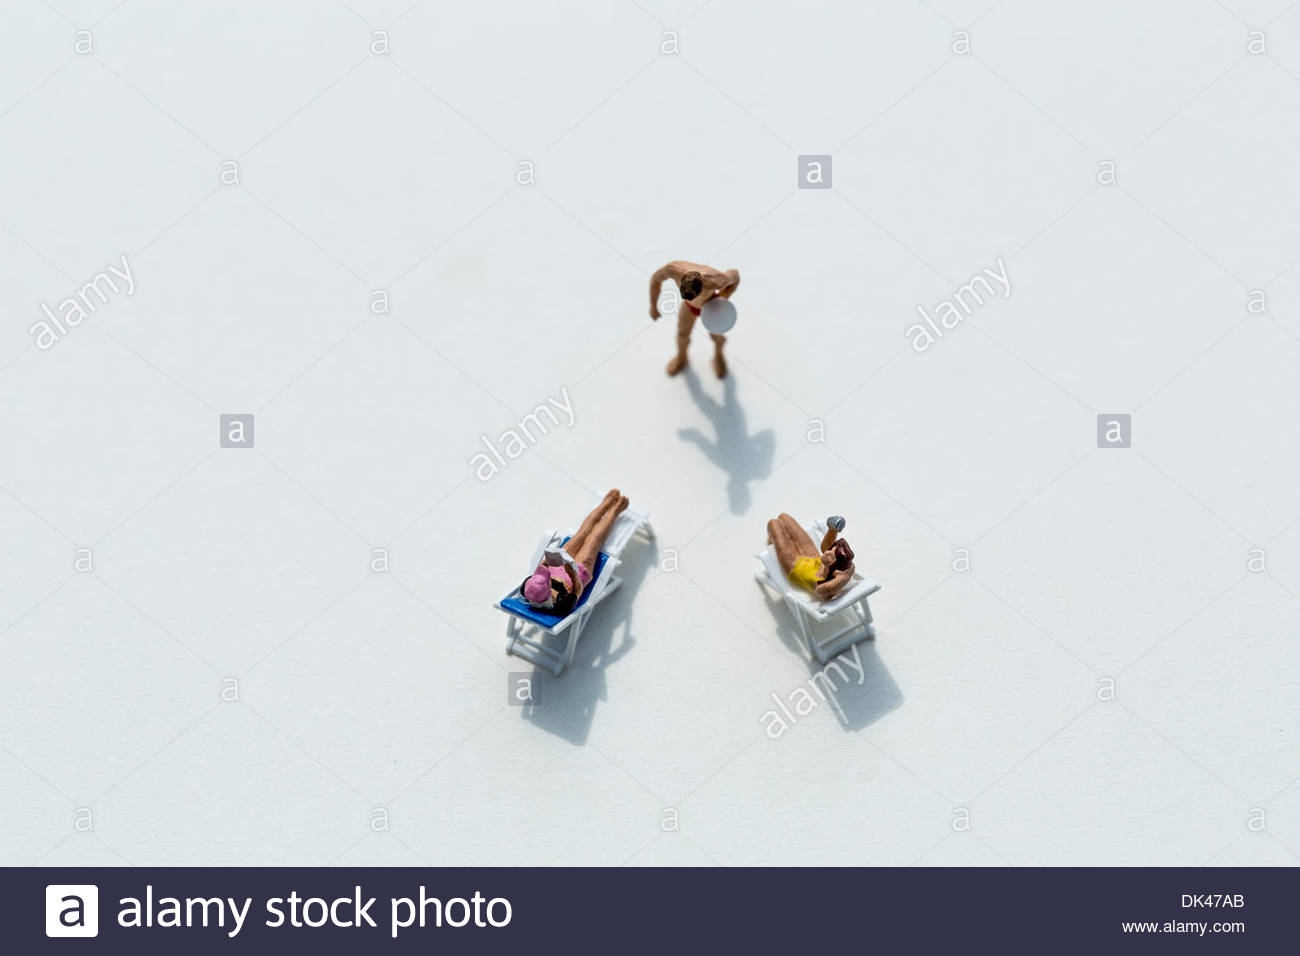 Figurines On A White Background Socializing At The Beach Club